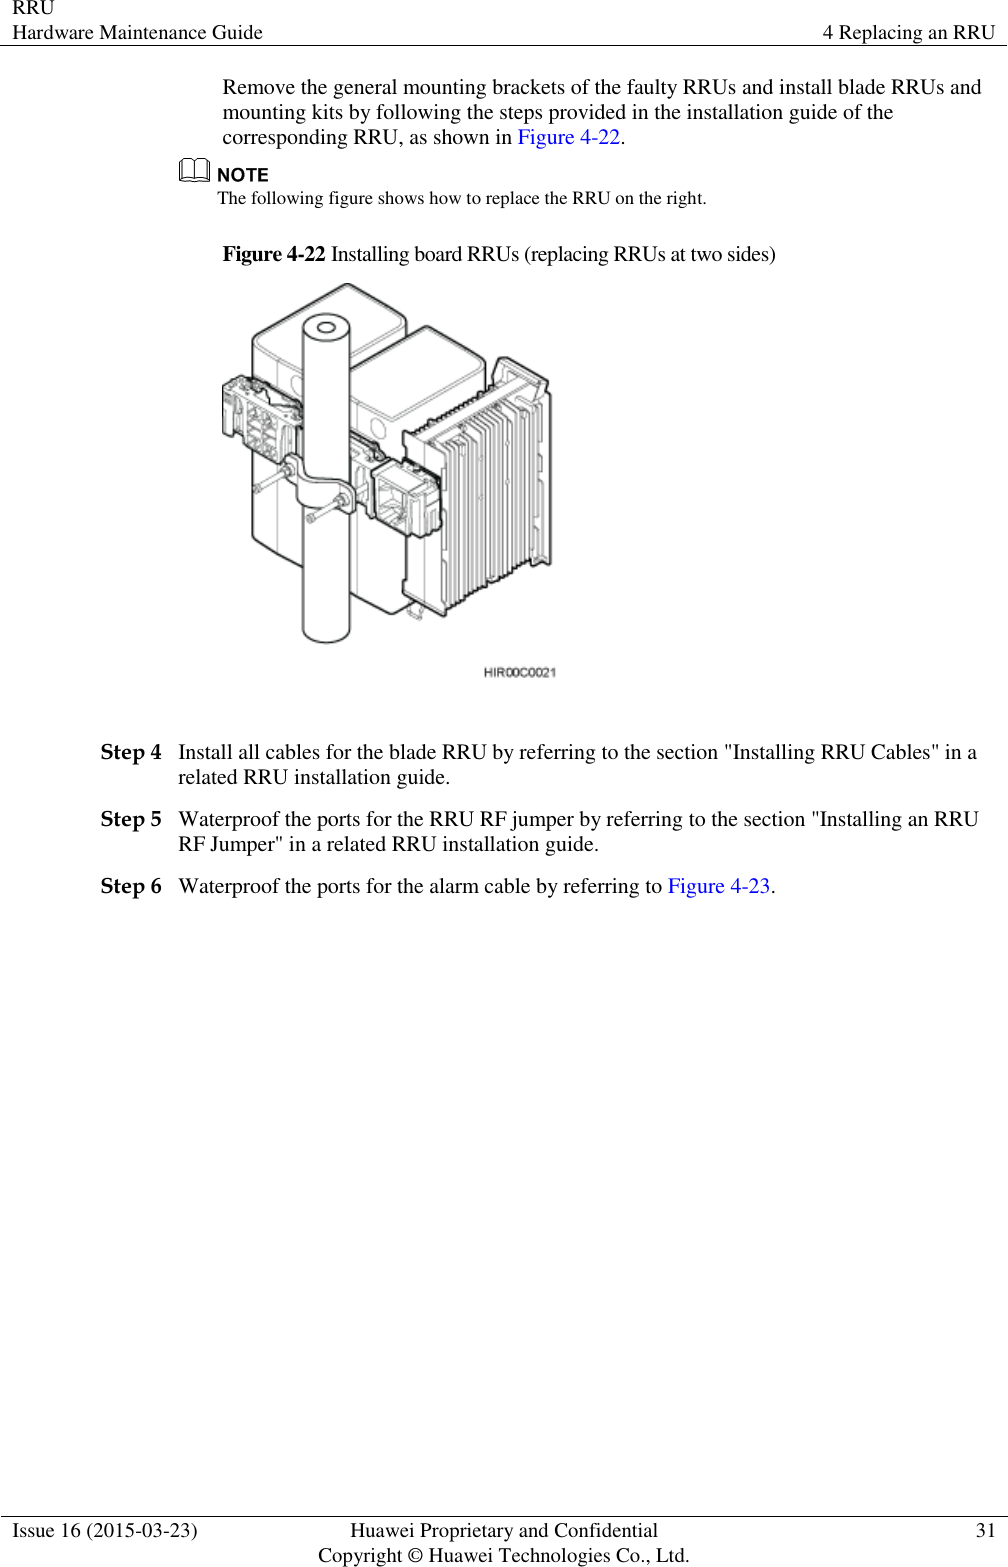 RRU Hardware Maintenance Guide 4 Replacing an RRU  Issue 16 (2015-03-23) Huawei Proprietary and Confidential                                     Copyright © Huawei Technologies Co., Ltd. 31  Remove the general mounting brackets of the faulty RRUs and install blade RRUs and mounting kits by following the steps provided in the installation guide of the corresponding RRU, as shown in Figure 4-22.  The following figure shows how to replace the RRU on the right. Figure 4-22 Installing board RRUs (replacing RRUs at two sides)   Step 4 Install all cables for the blade RRU by referring to the section &quot;Installing RRU Cables&quot; in a related RRU installation guide. Step 5 Waterproof the ports for the RRU RF jumper by referring to the section &quot;Installing an RRU RF Jumper&quot; in a related RRU installation guide. Step 6 Waterproof the ports for the alarm cable by referring to Figure 4-23. 